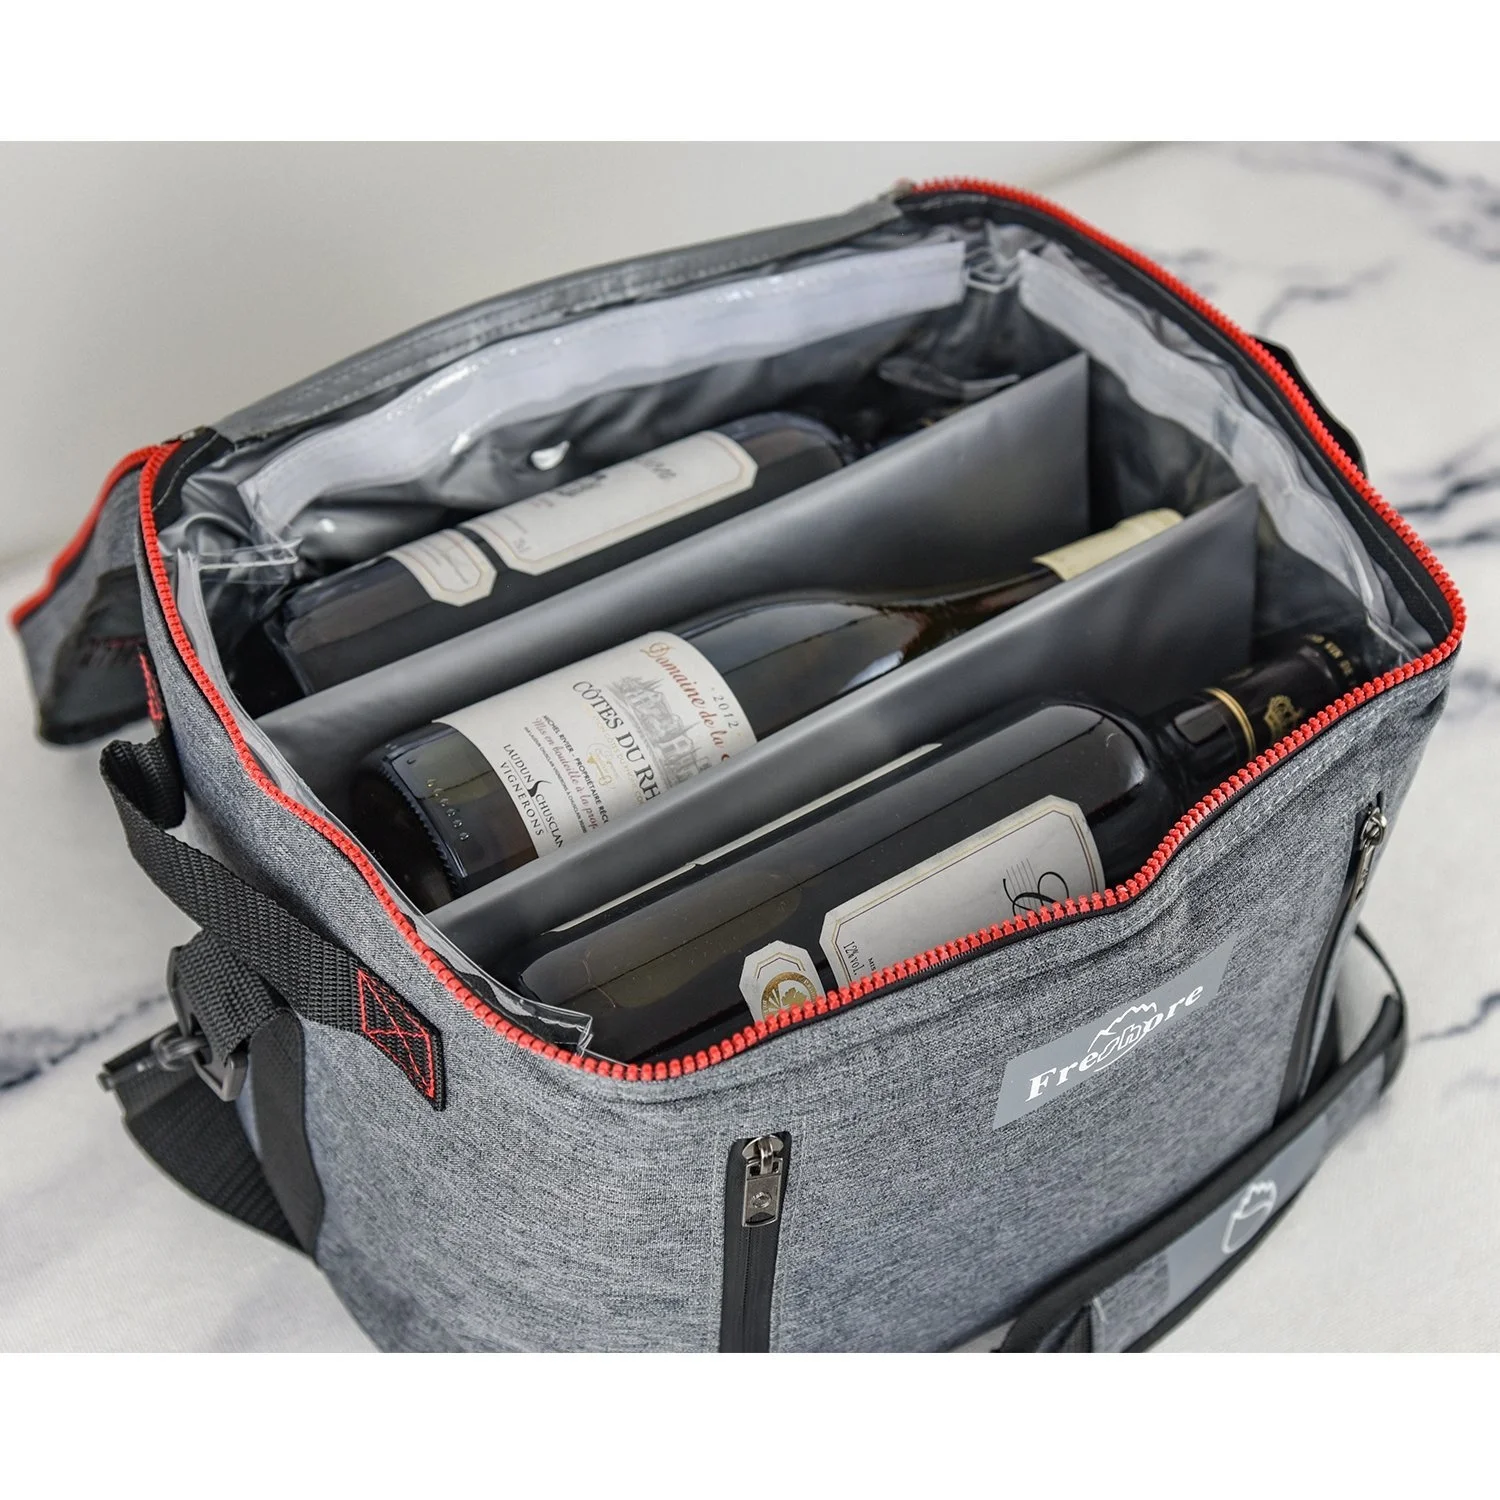 

Hold 20 Pack of Cans or 9 Wine Bottles Insulated Soft Cooler Bag with Heavy Duty Handle Adjustable Shoulder Strap, Customized color